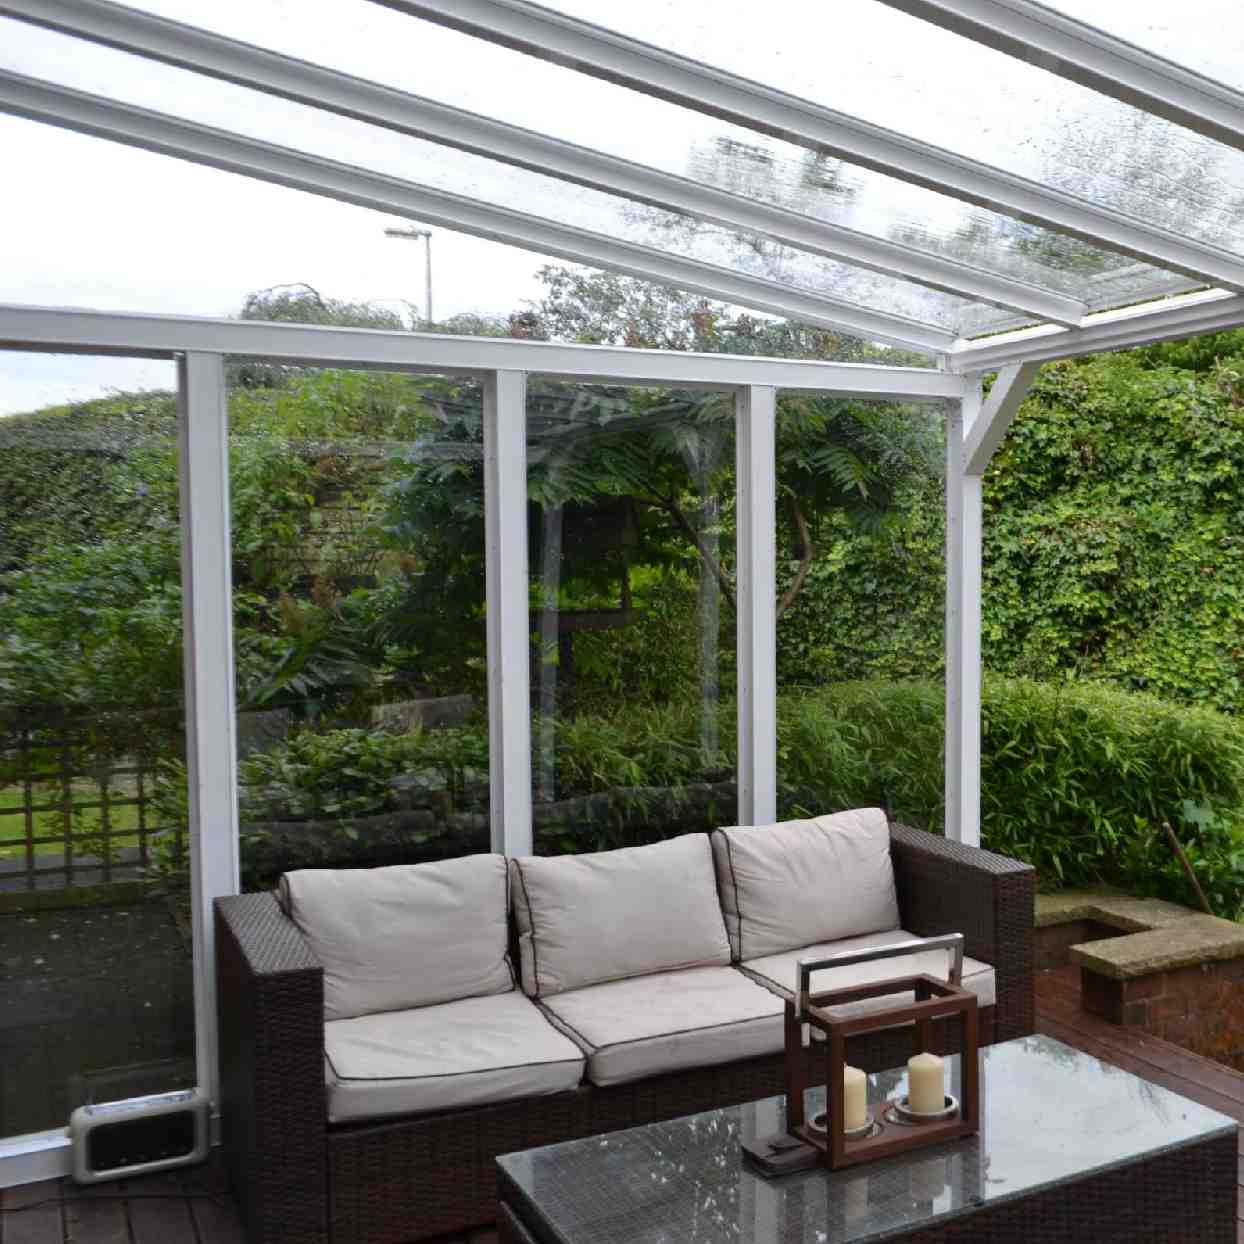 Buy Omega Verandah White with 6mm Glass Clear Plate Polycarbonate Glazing - 7.0m (W) x 2.0m (P), (4) Supporting Posts online today